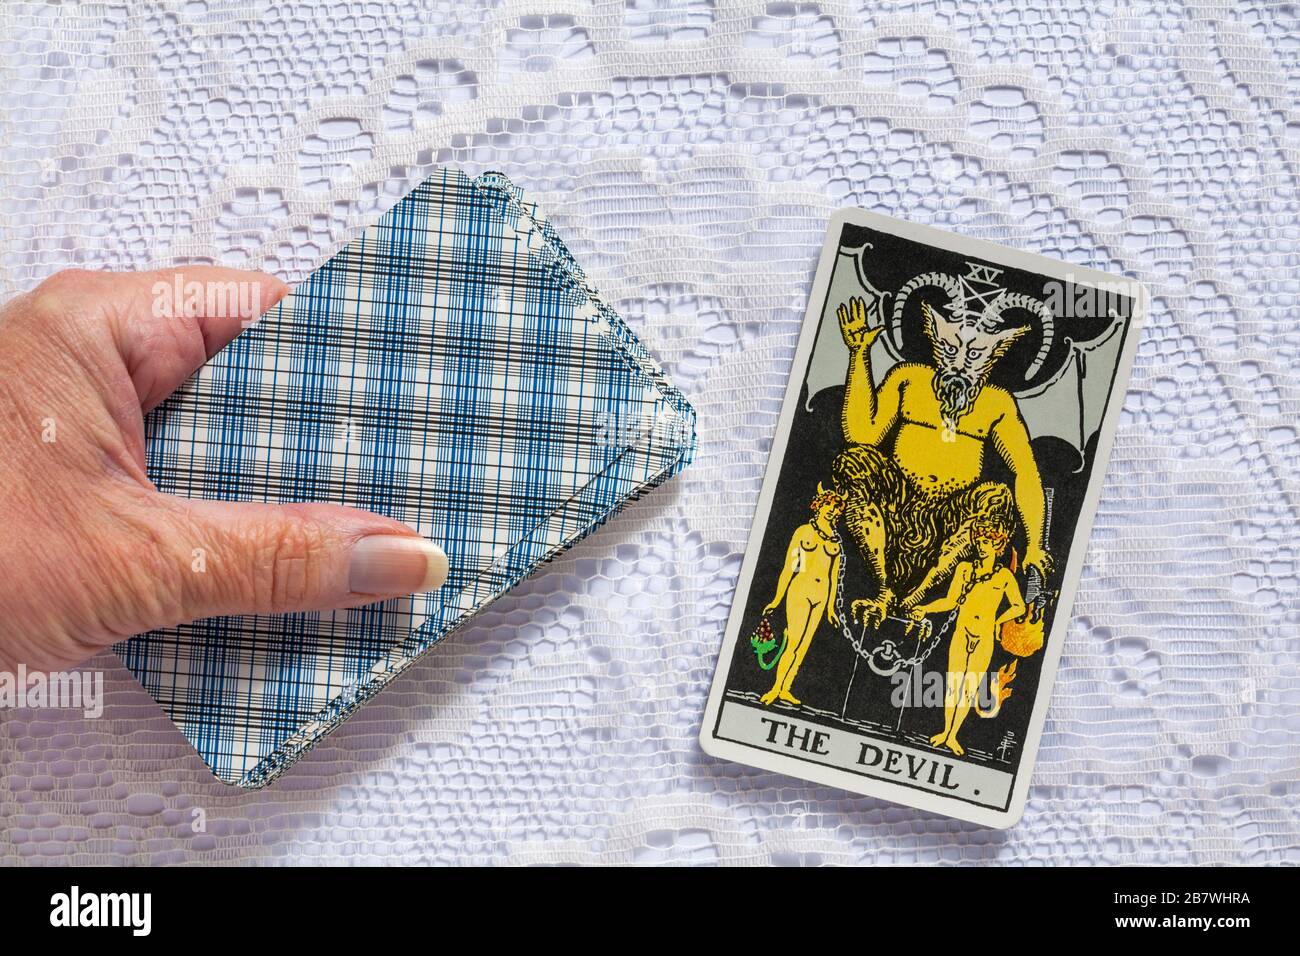 hand holding Rider Tarot Cards designed by Pamela Colman Smith under supervision of Arthur Edward Waite with The Devil tarot card upturned Stock Photo